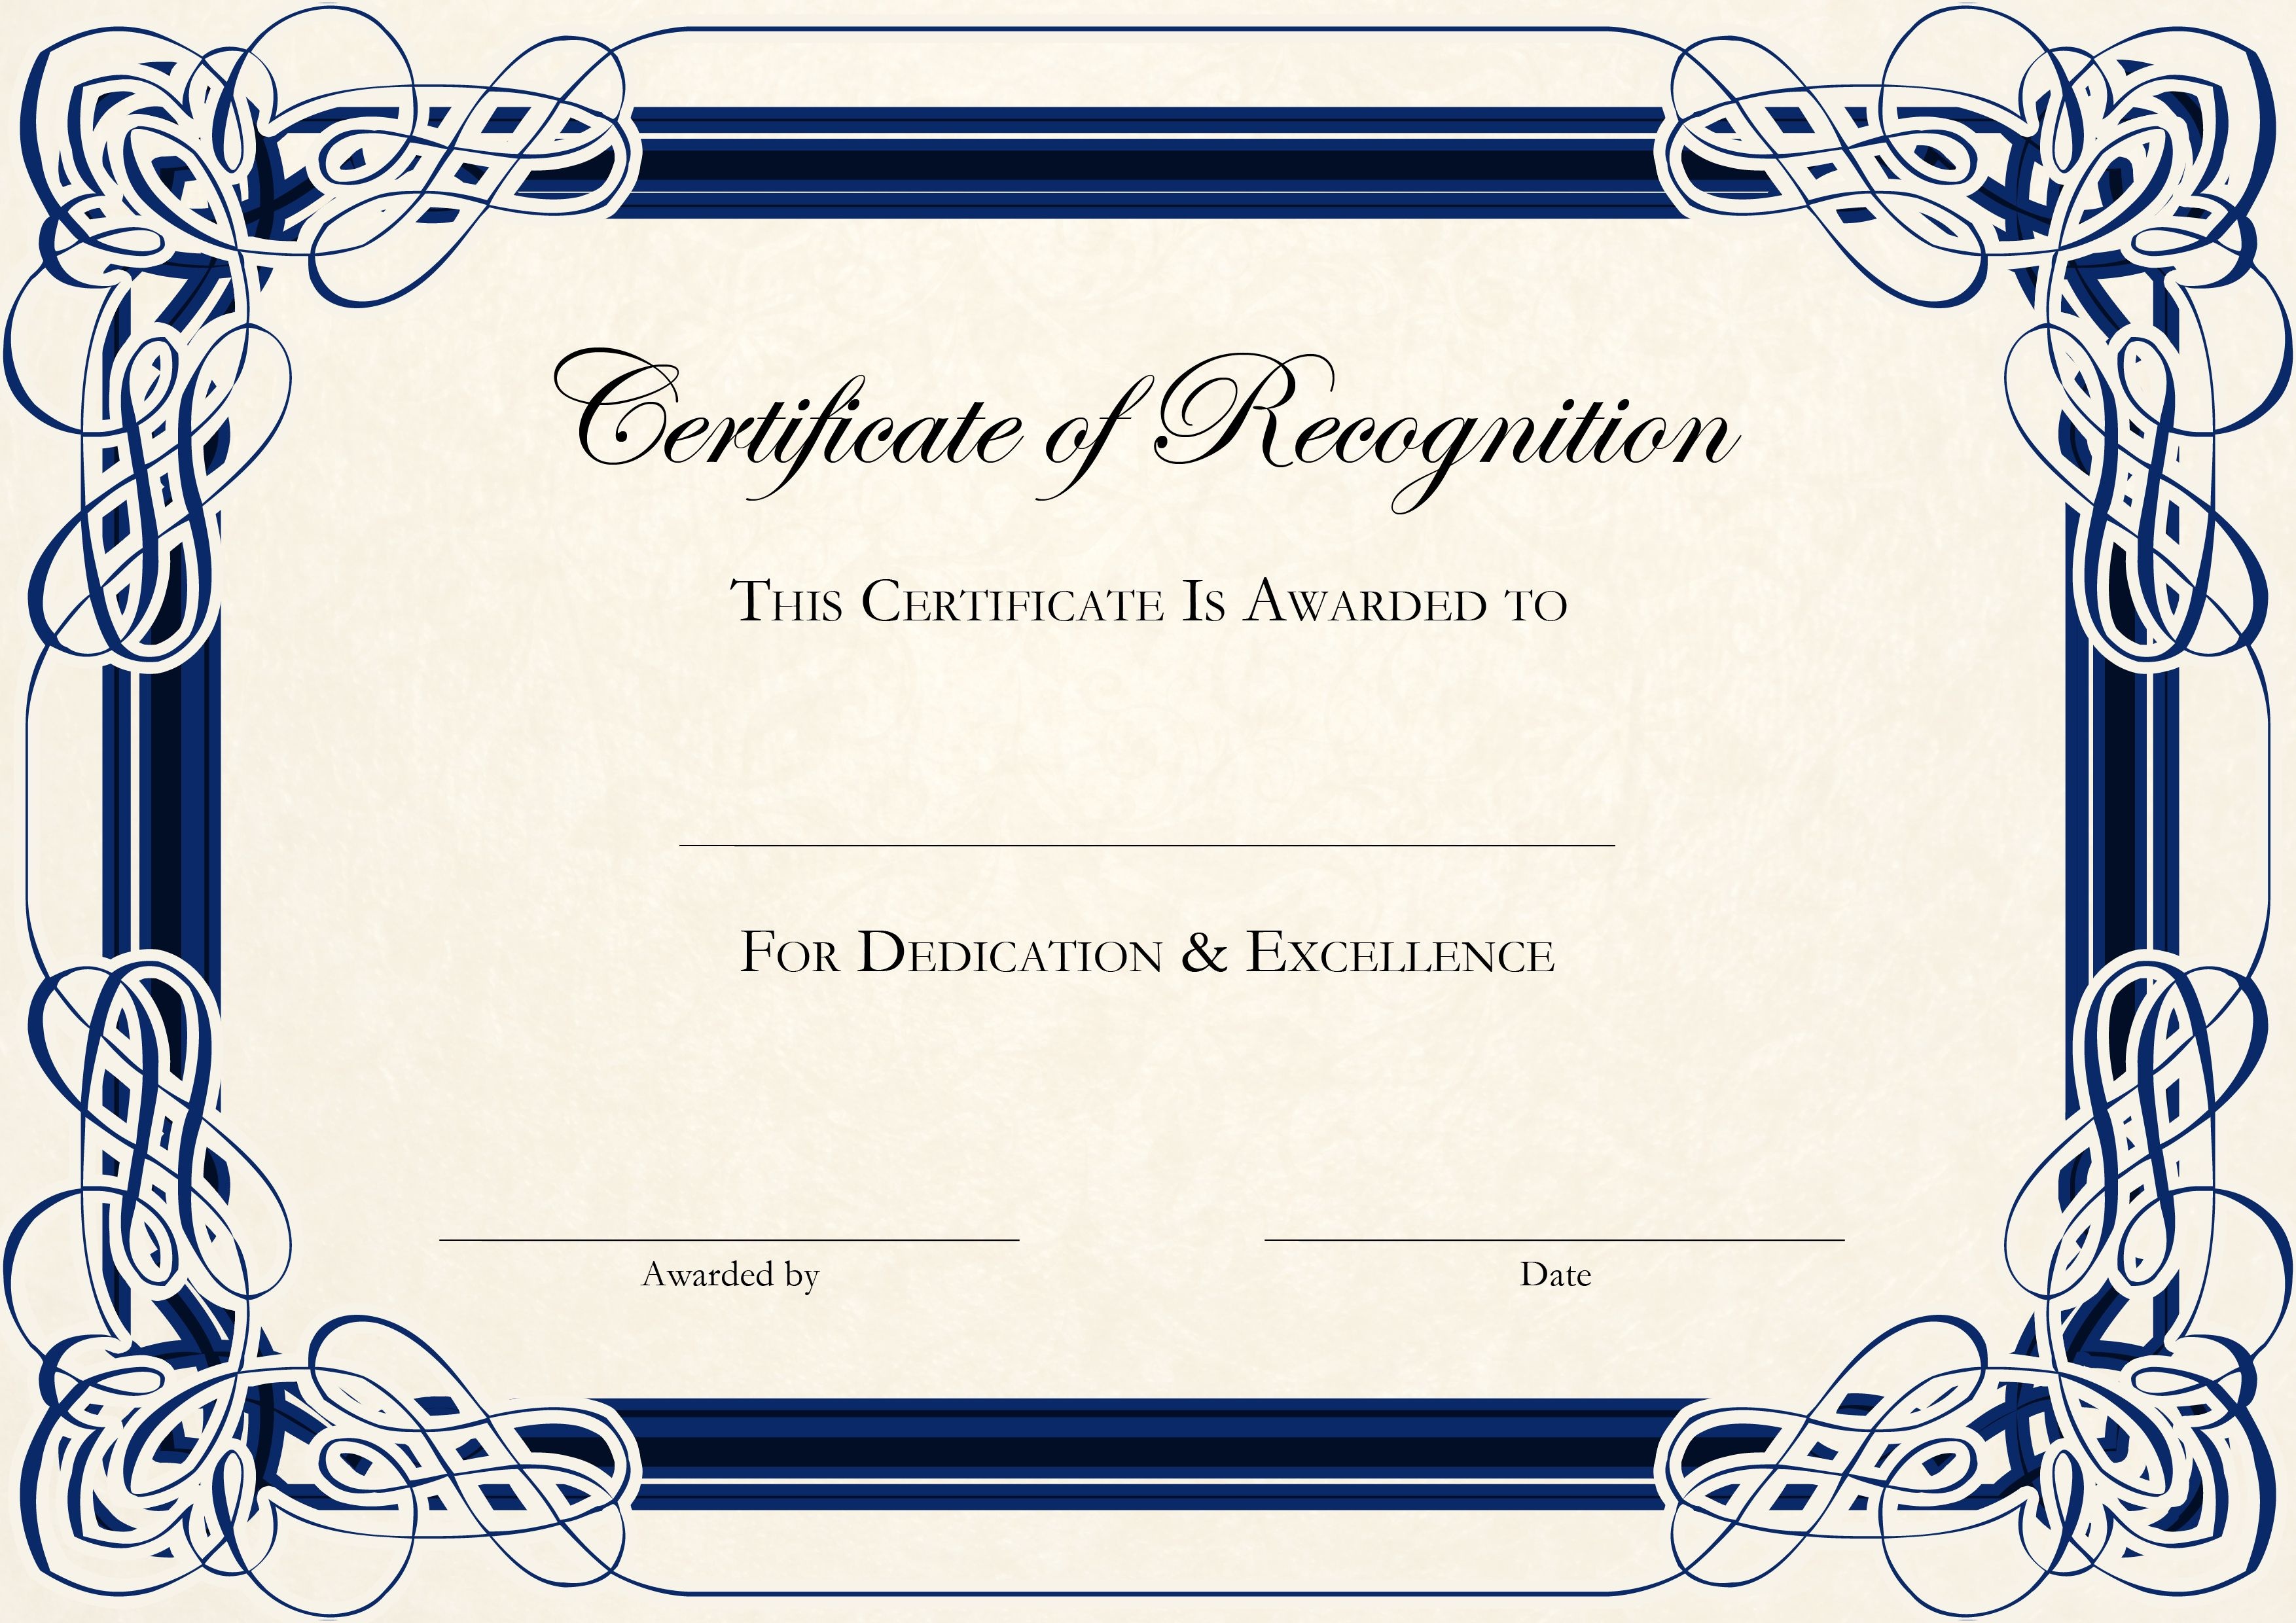 Sports Cetificate | Certificate Of Recognition A4 Thumbnail - Free Printable Certificate Templates